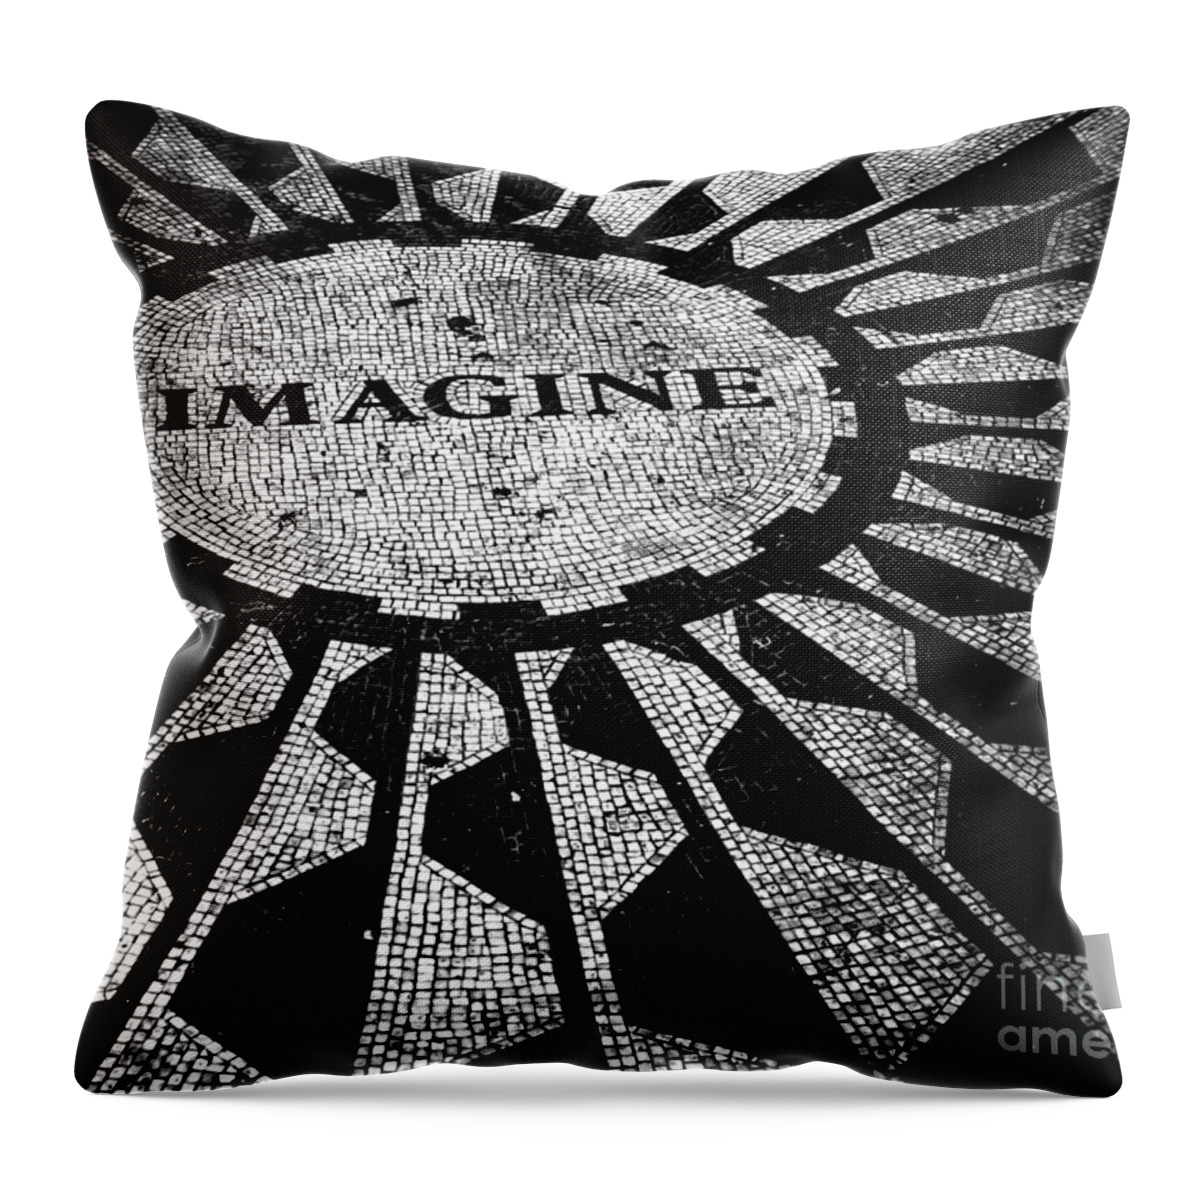 Imagine Throw Pillow featuring the photograph Imagine by Ken Marsh